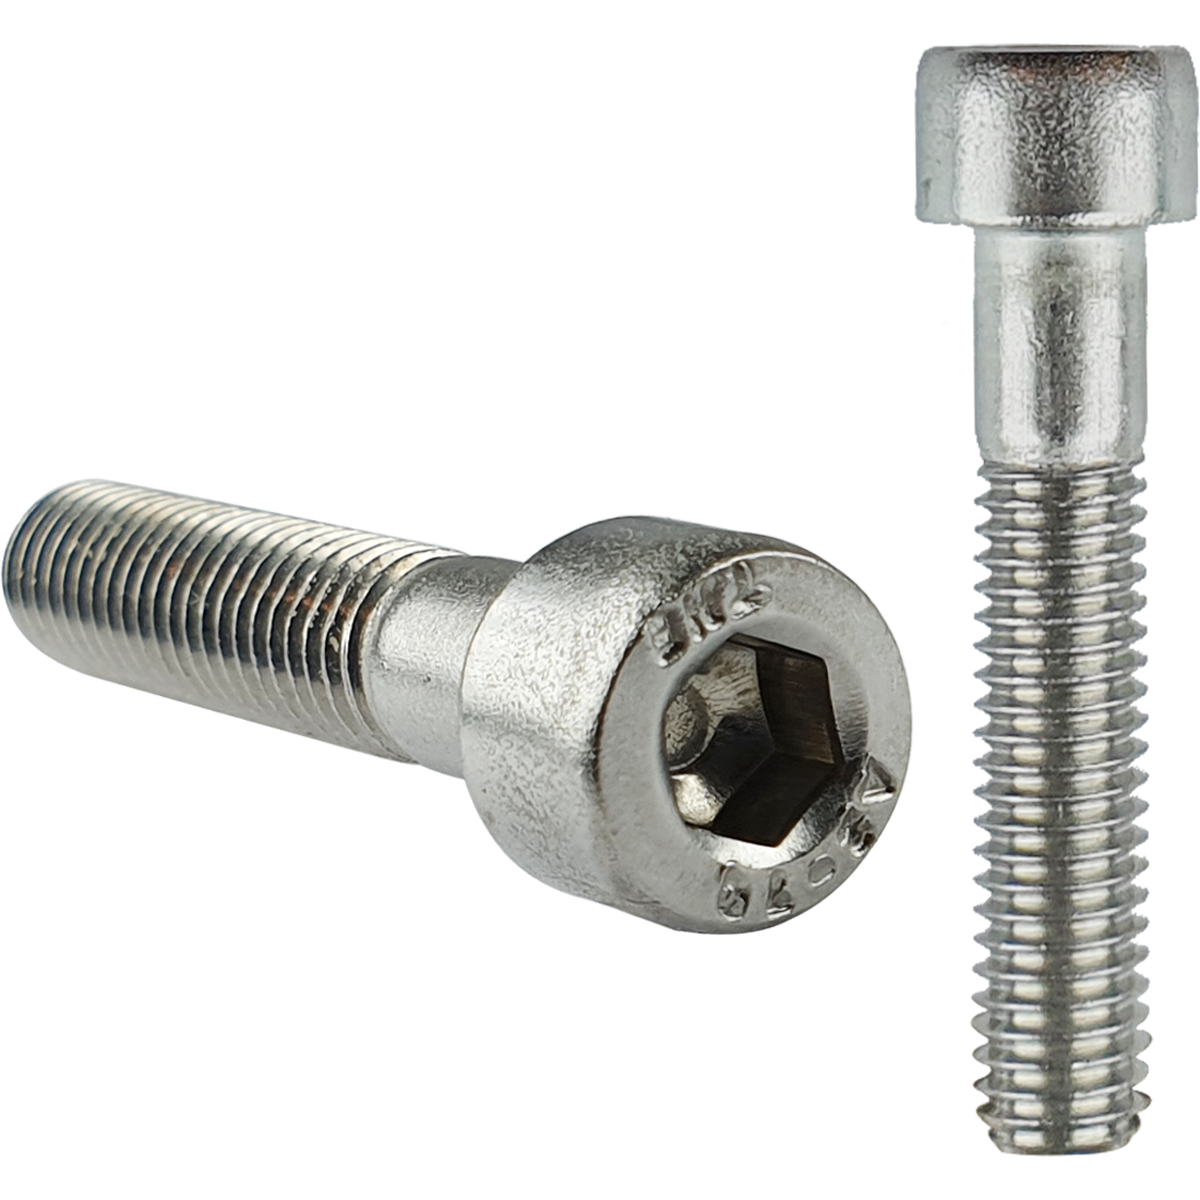 Corrosion resistant, A2 stainless steel, socket cap head screws, know as socket screws, available in an extensive range of diameters and lengths